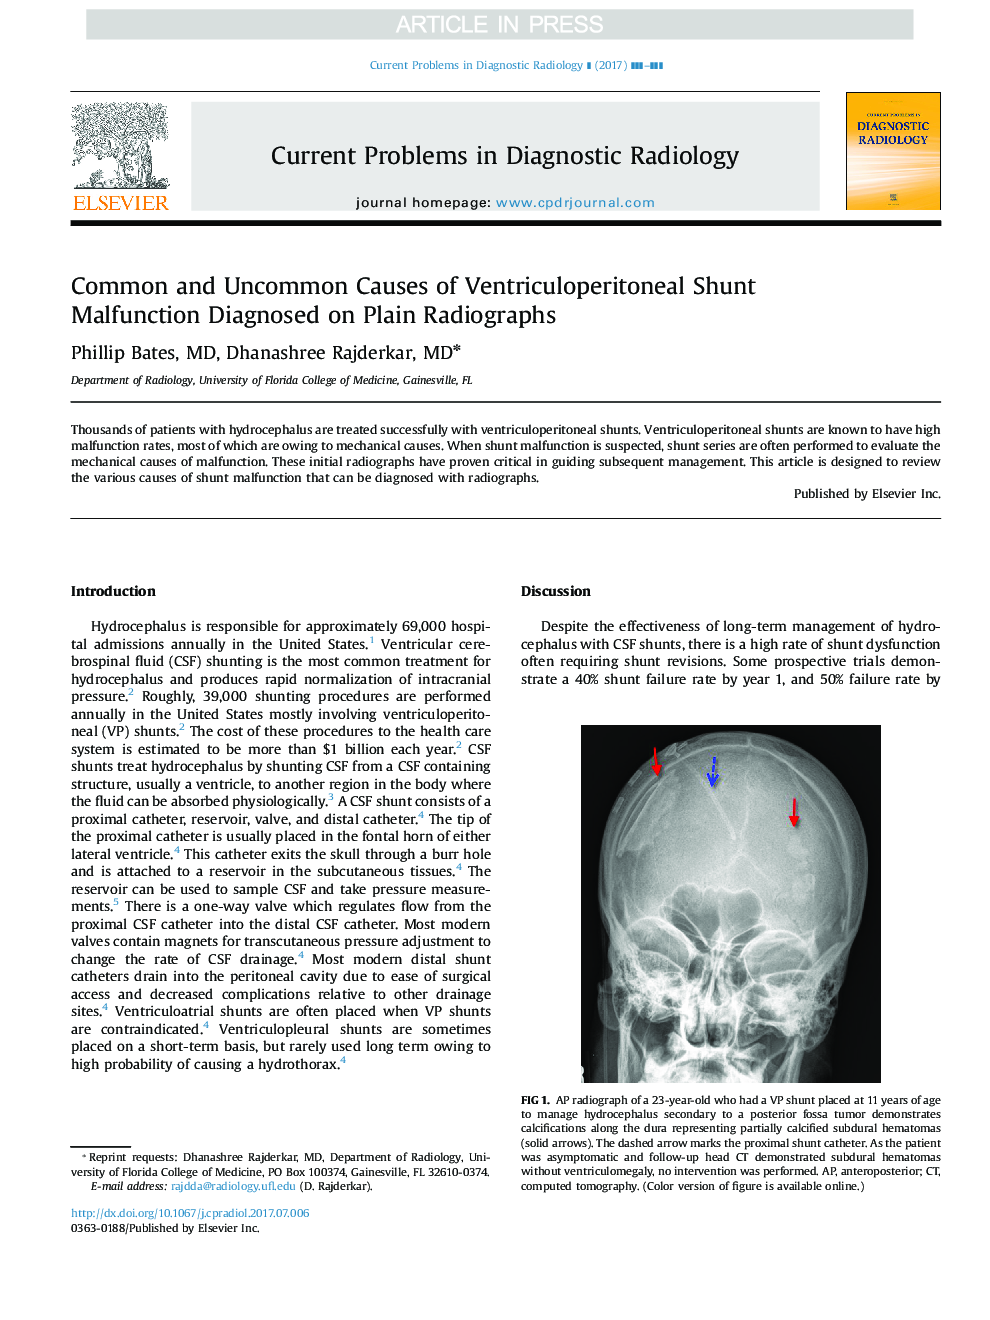 Common and Uncommon Causes of Ventriculoperitoneal Shunt Malfunction Diagnosed on Plain Radiographs